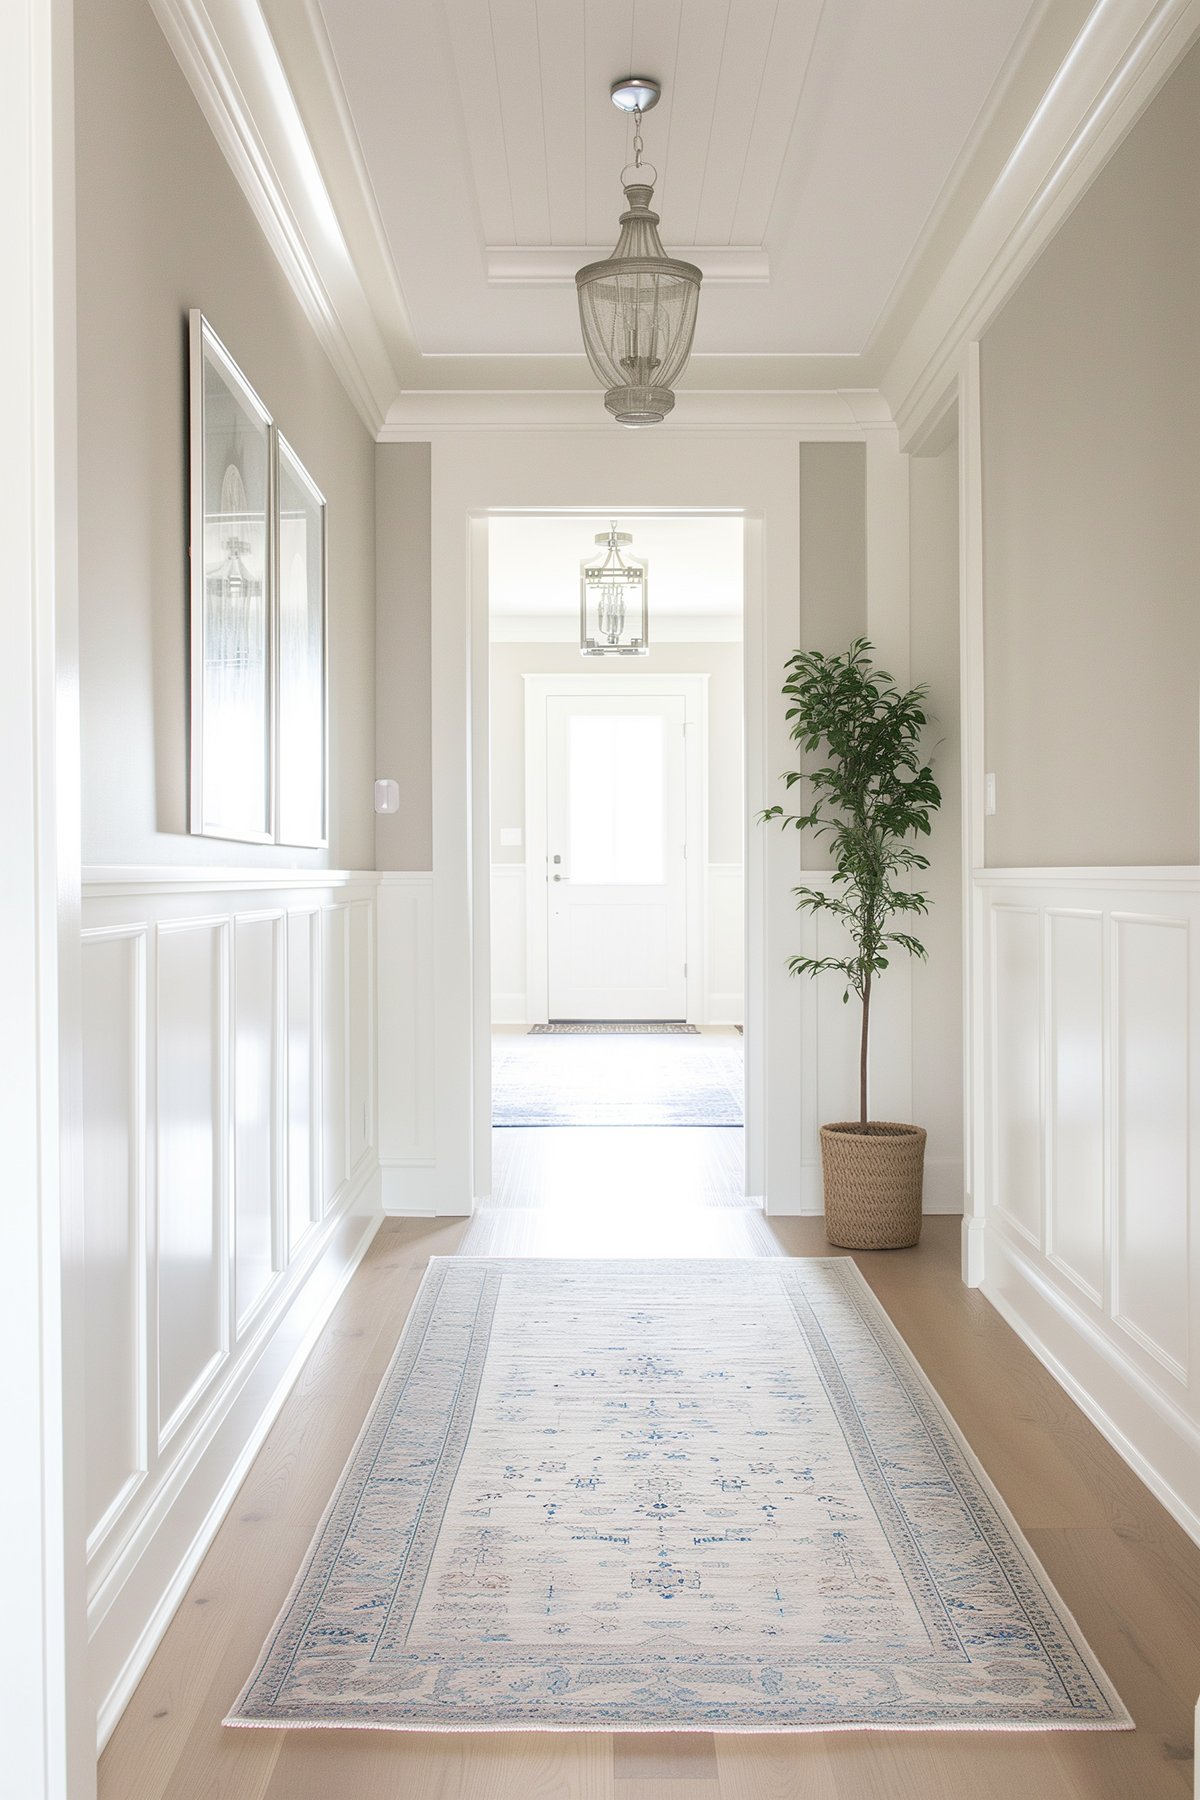 Hallway with white wainscoting and the upper half of the walls painted Benjamin Moore Revere Pewter.